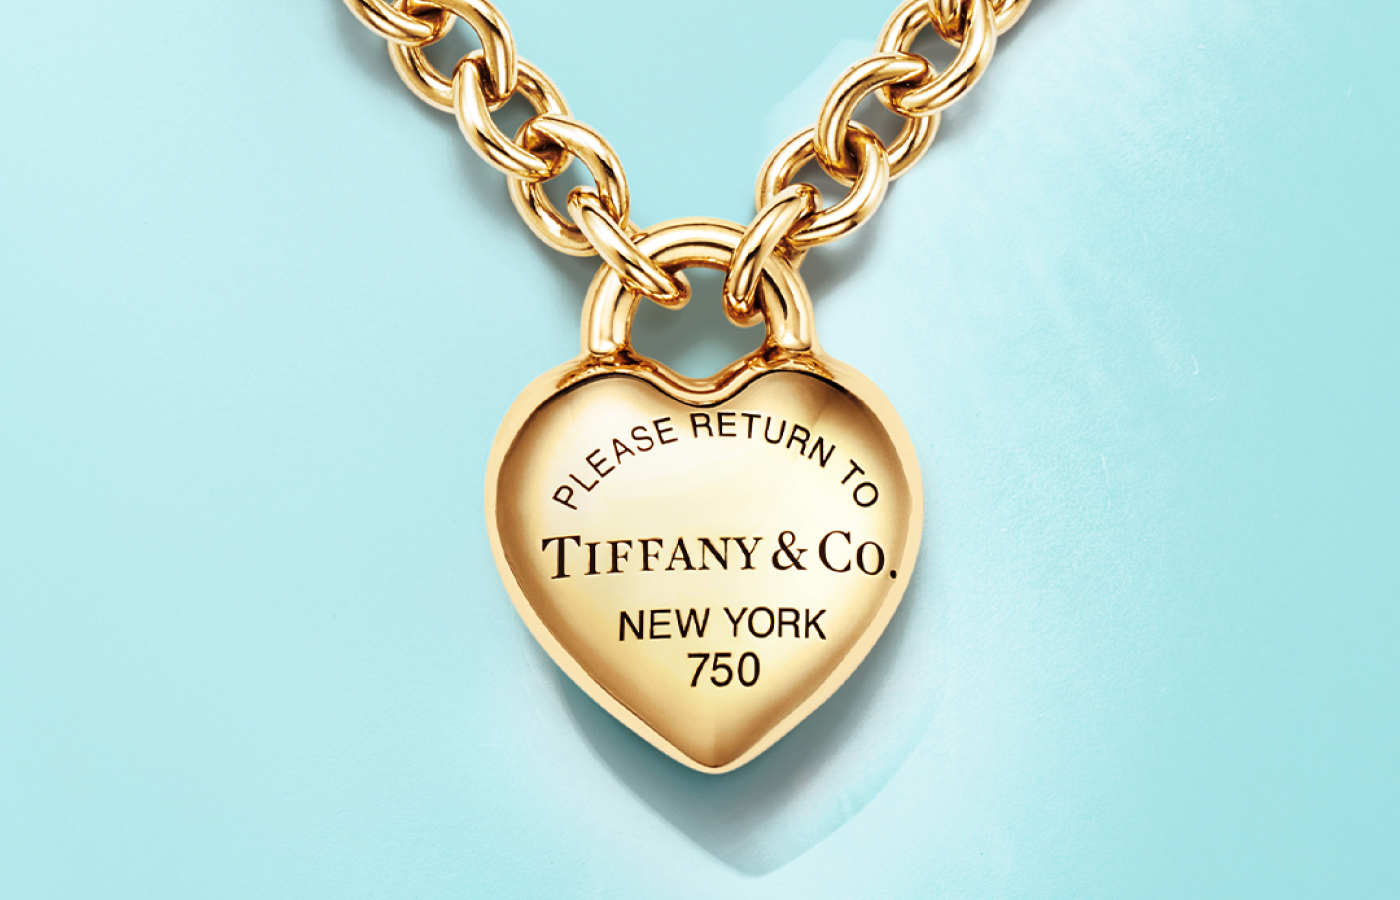 Tiffany & Co. necklace in gold